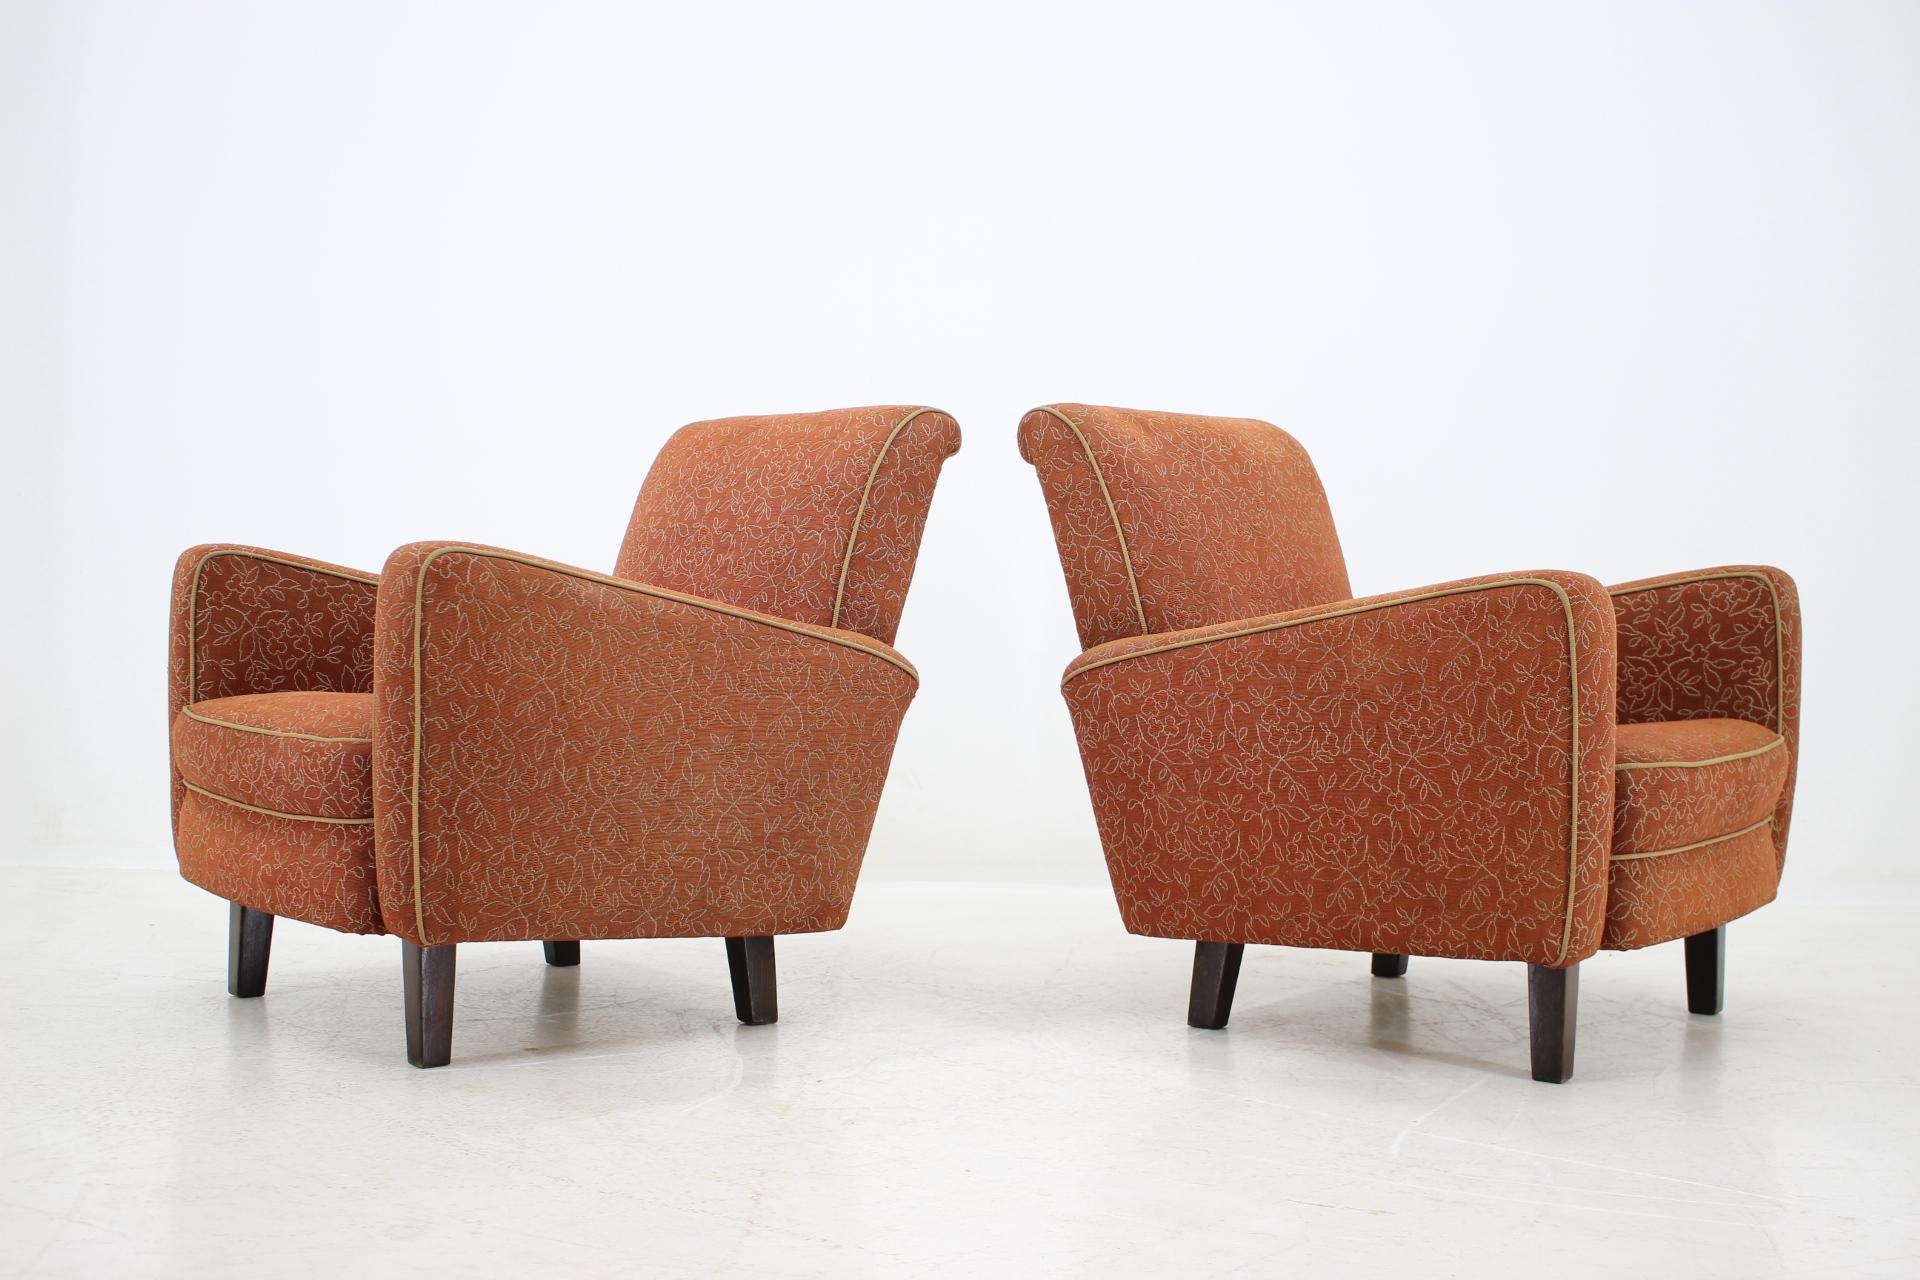 - Made in Czechoslovakia
- Made of wood, fabric
- Suitable for upholstery renovation
- Good, original condition.